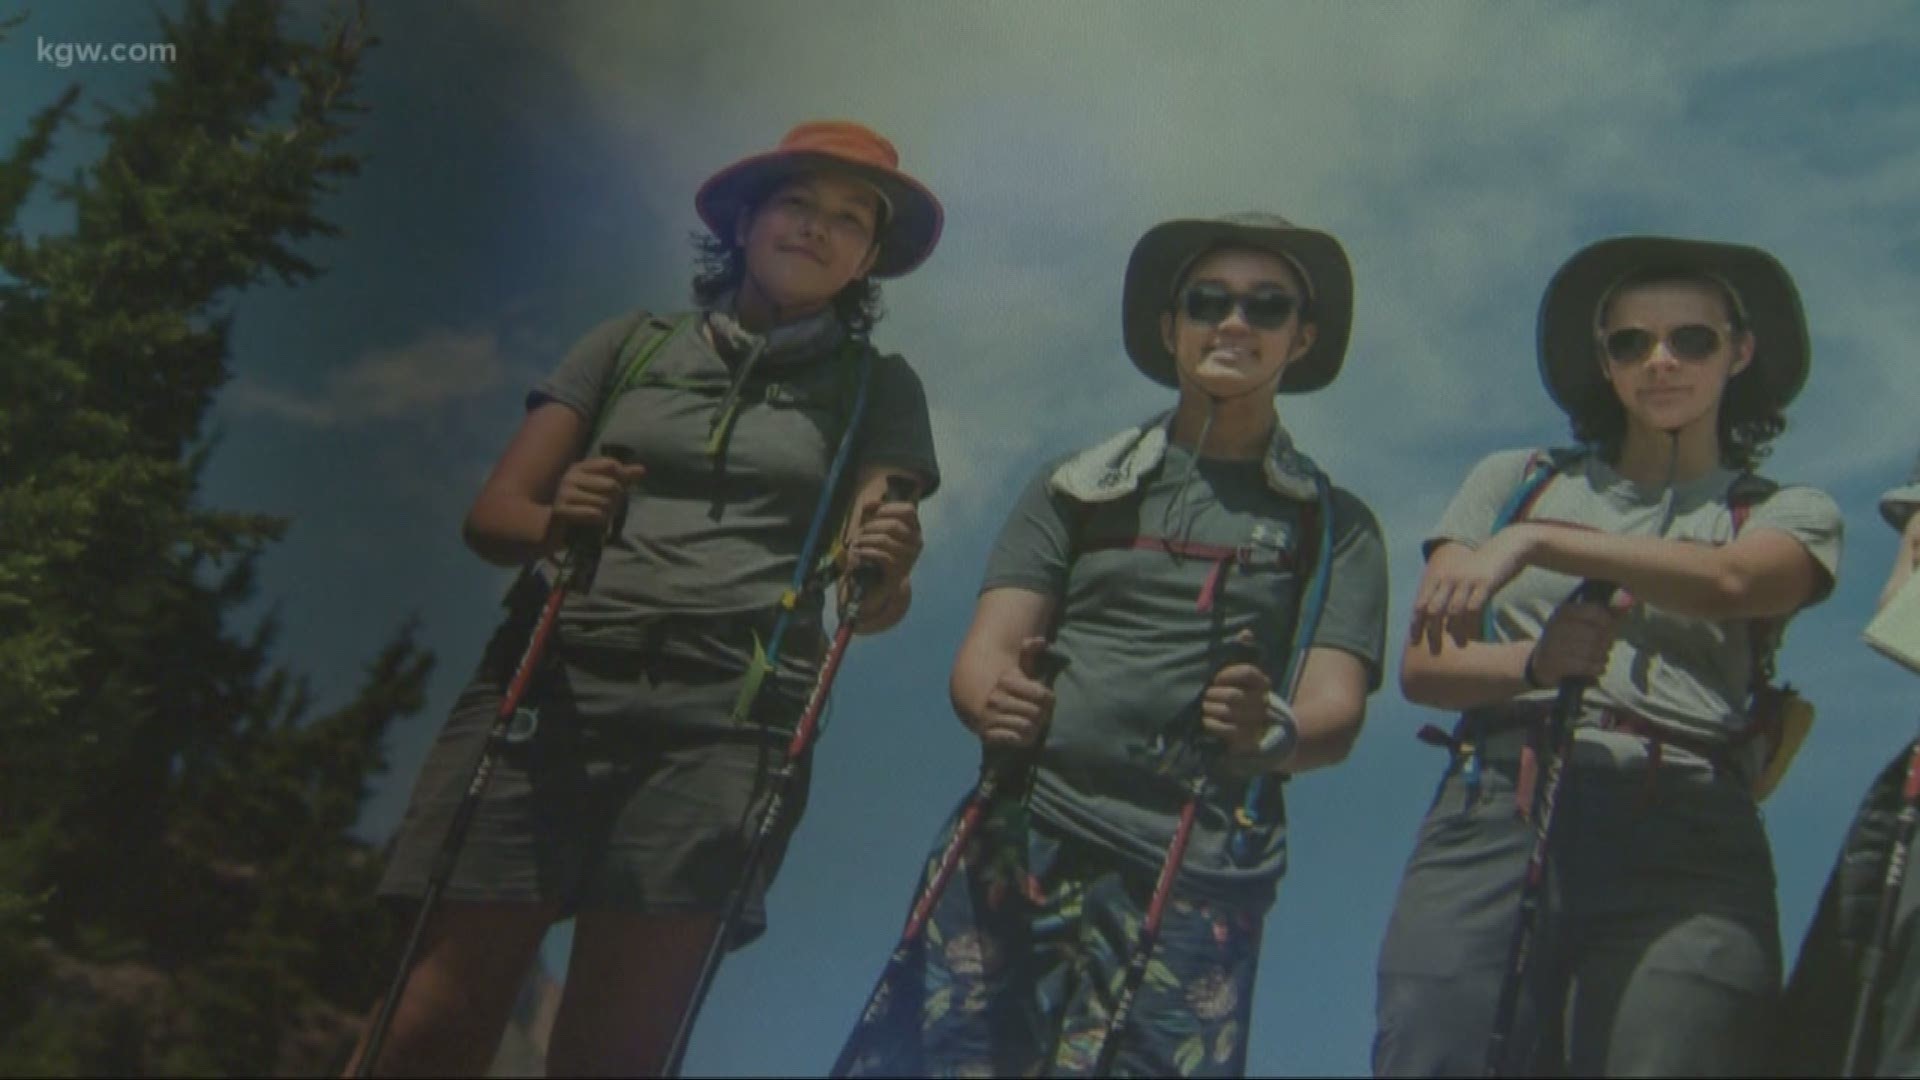 A local nonprofit is raising money to help fund a special hiking journey for teens fighting cancer.